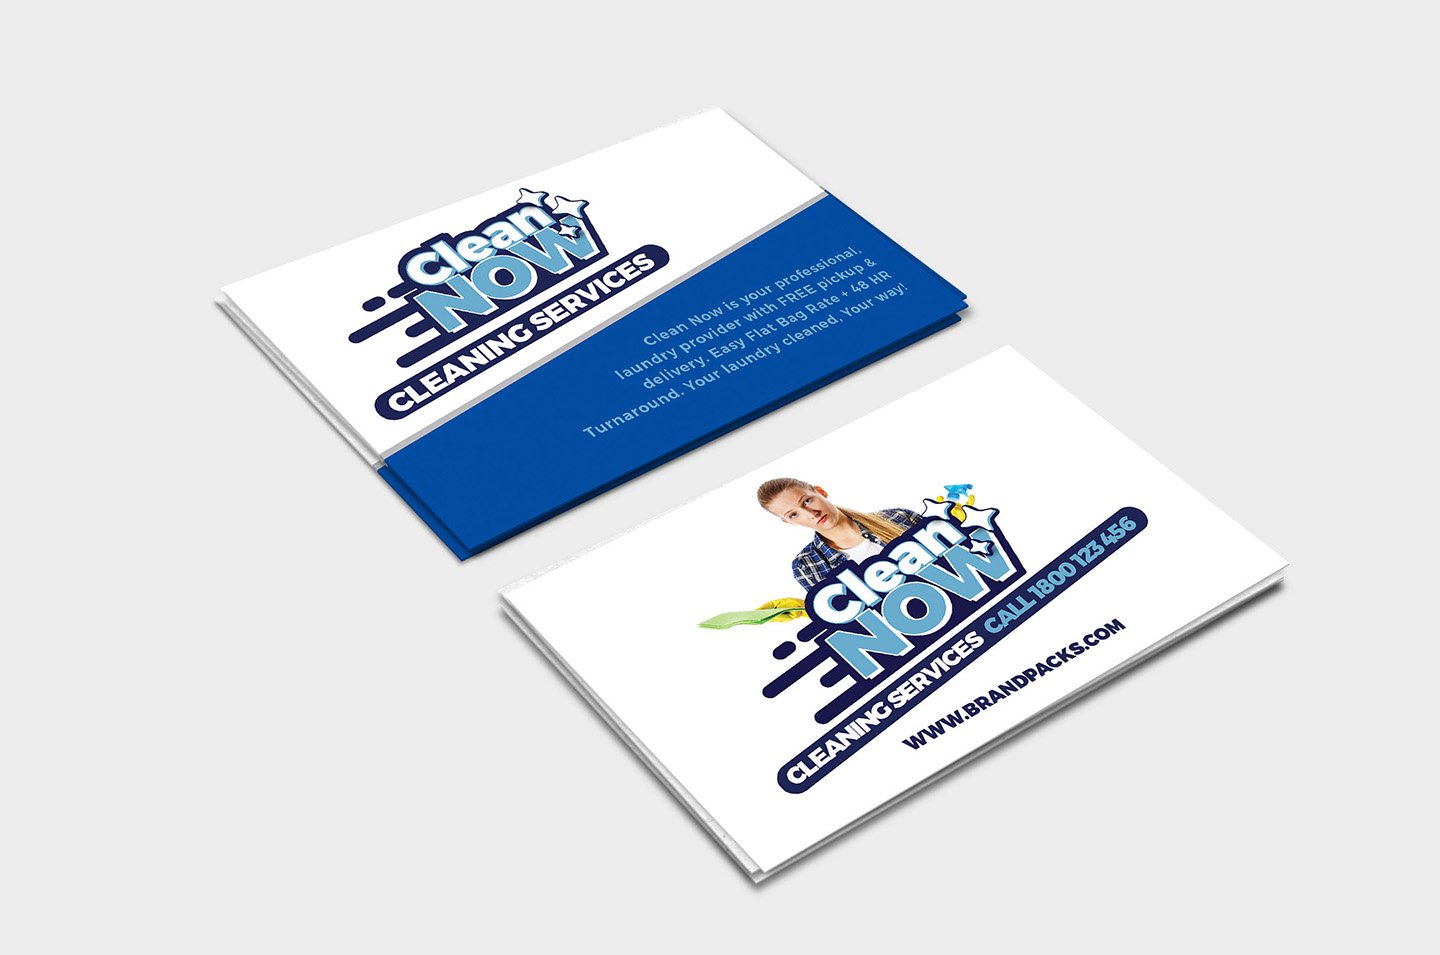 cleaning services business cards